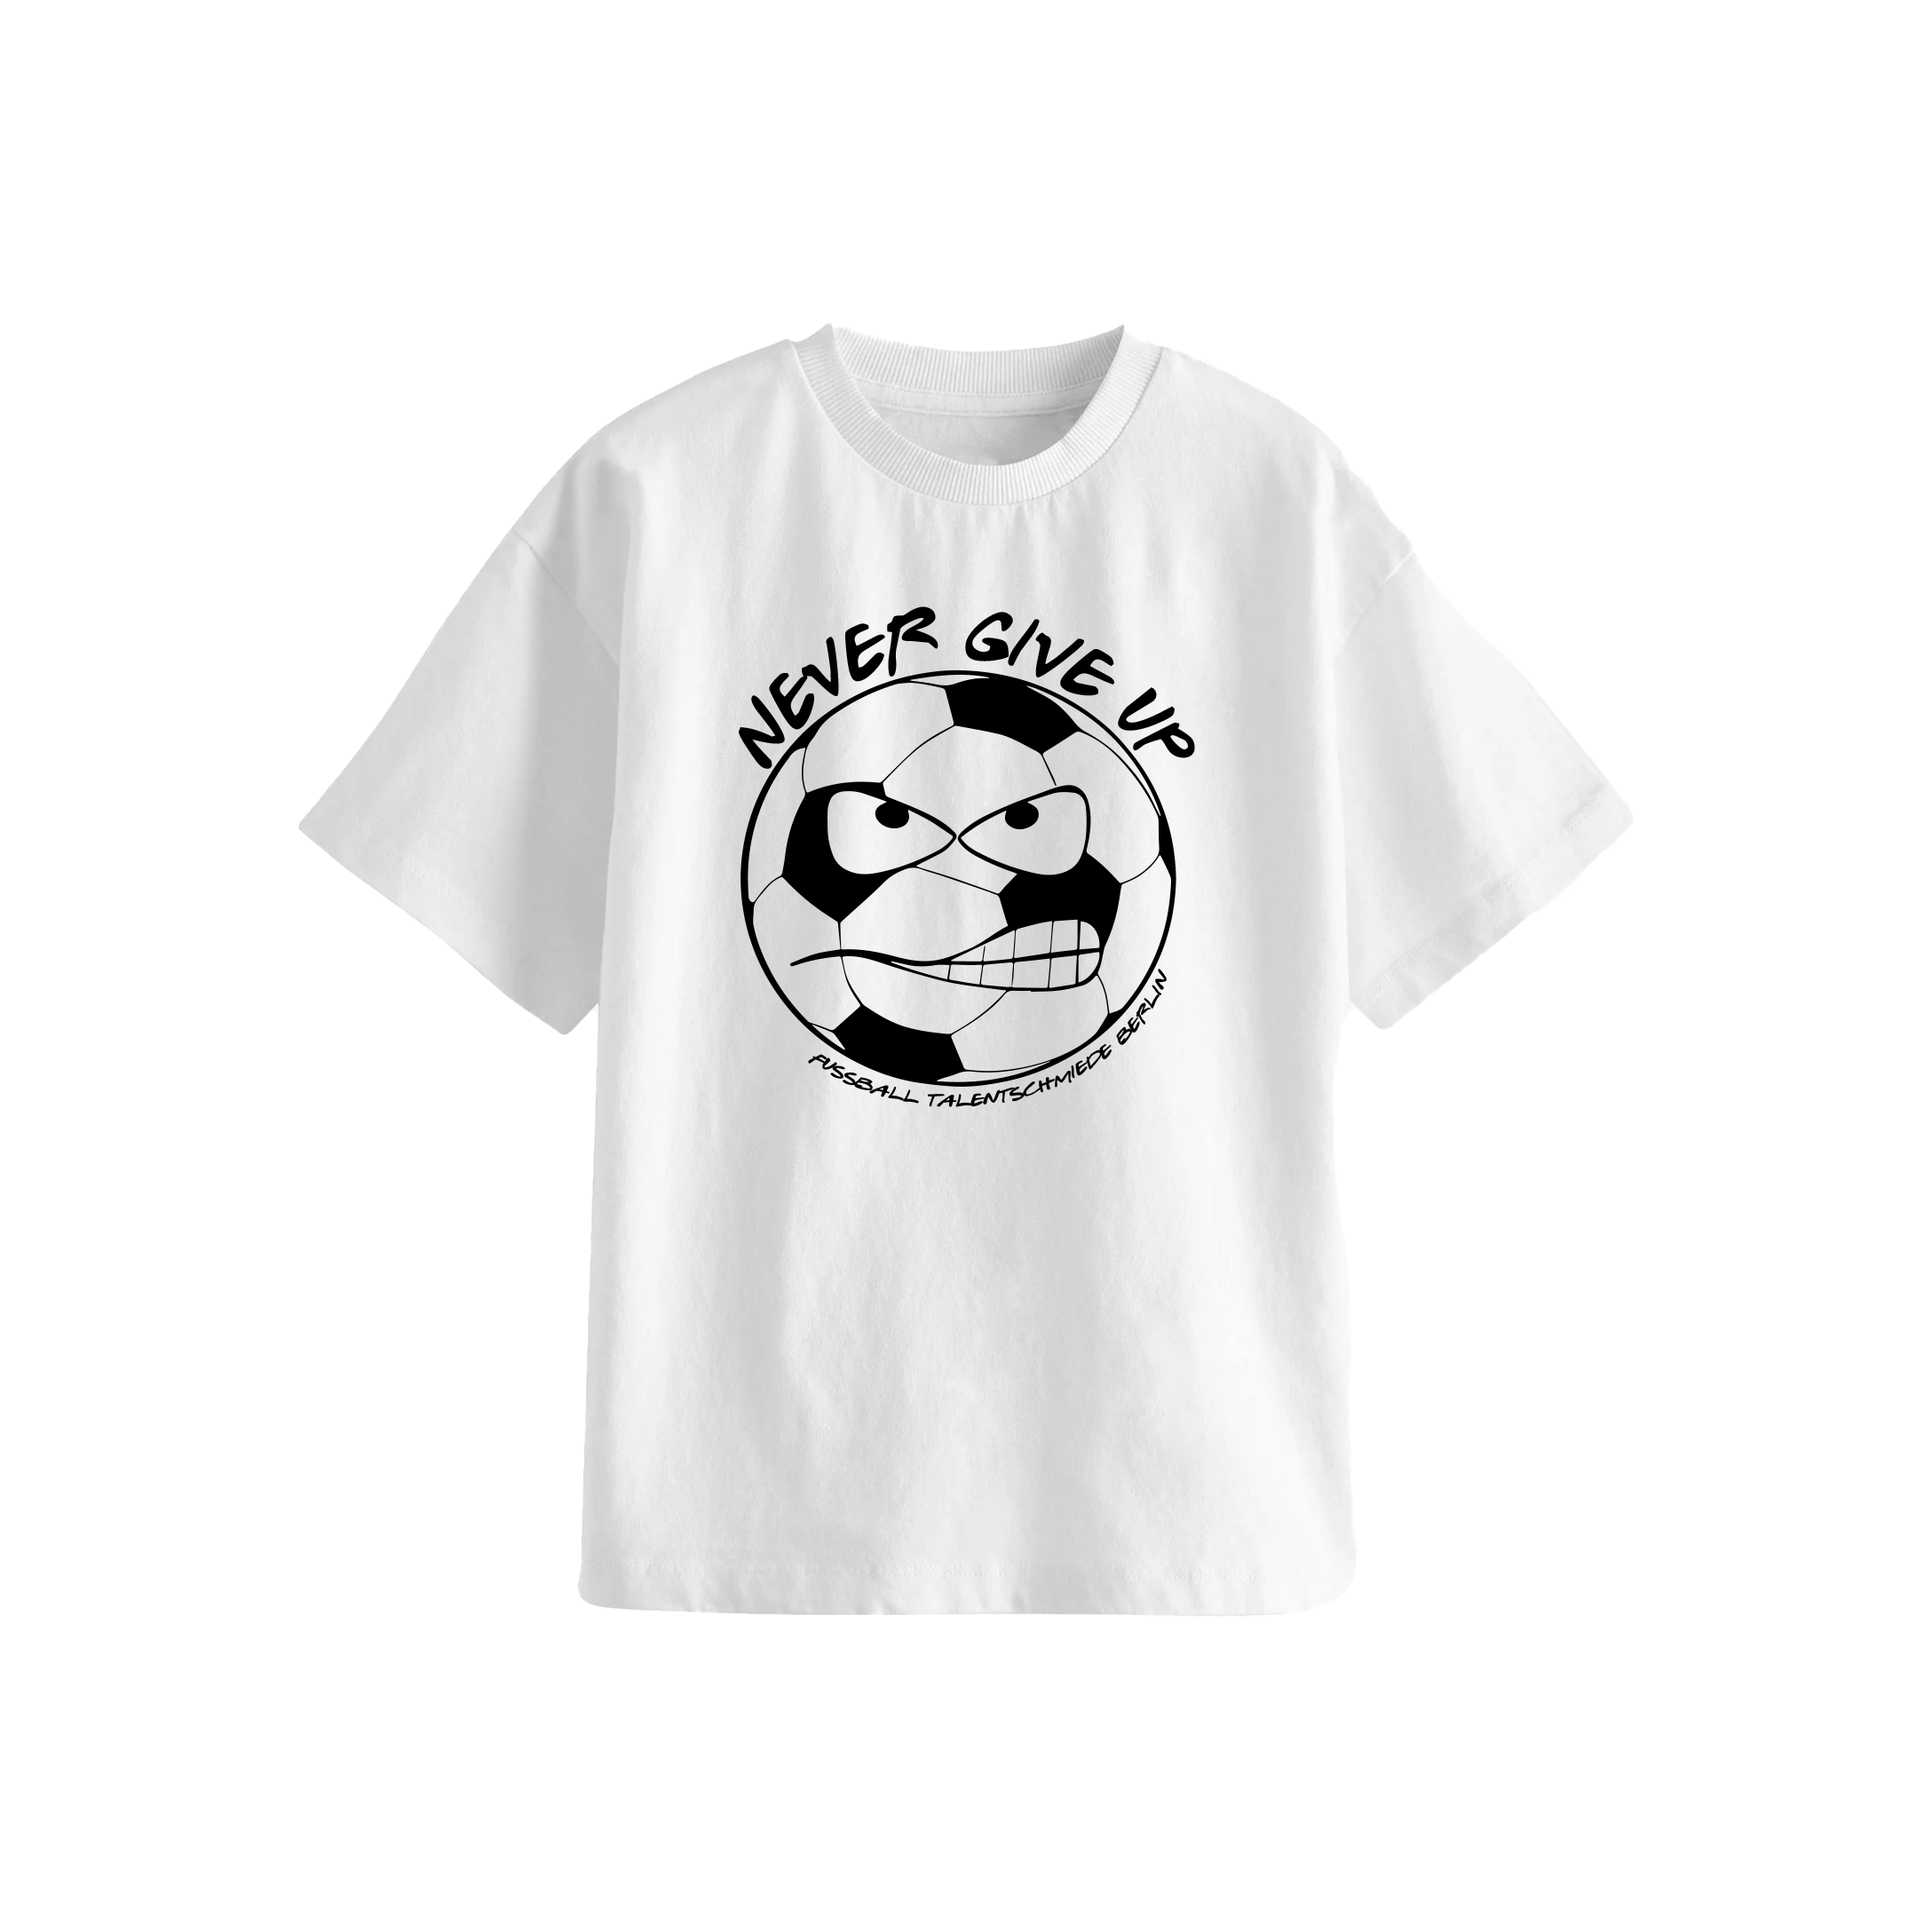 NEVER GIVE UP - KINDER T-SHIRT WEISS